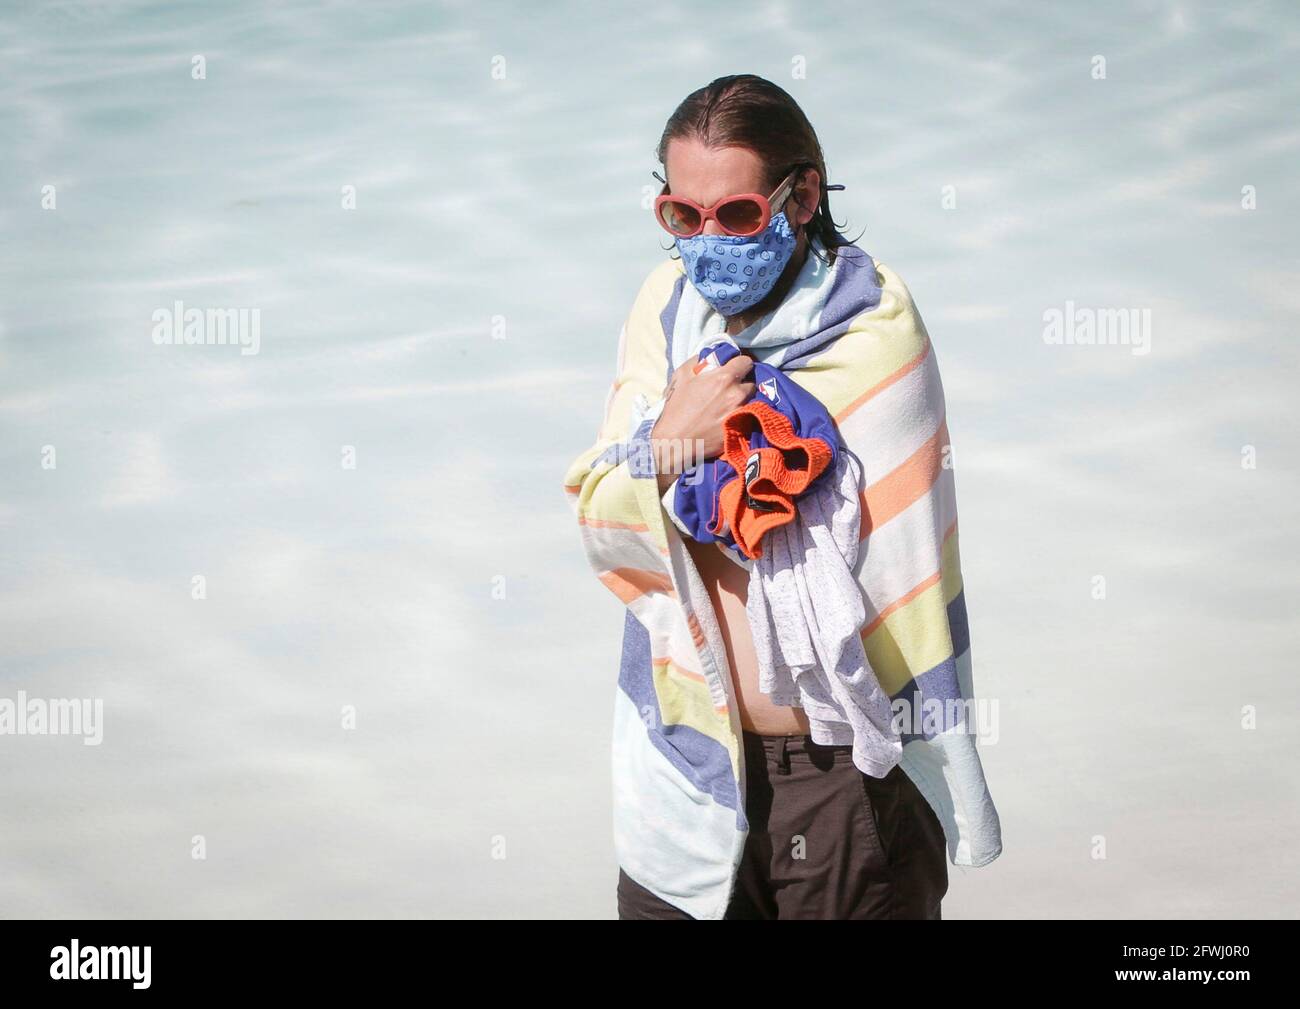 Vancouver, Canada. 22nd May, 2021. A swimmer is seen wearing a face mask on the first day of re-opening at the Kitsilano outdoor pool in Vancouver, British Columbia, Canada, May 22, 2021. Three of Vancouver's outdoor pools reopened Saturday. Due to the COVID-19 registration in place, anyone who wants to take a dip will have to register in advance due to pandemic-related restrictions on capacity. Credit: Liang Sen/Xinhua/Alamy Live News Stock Photo